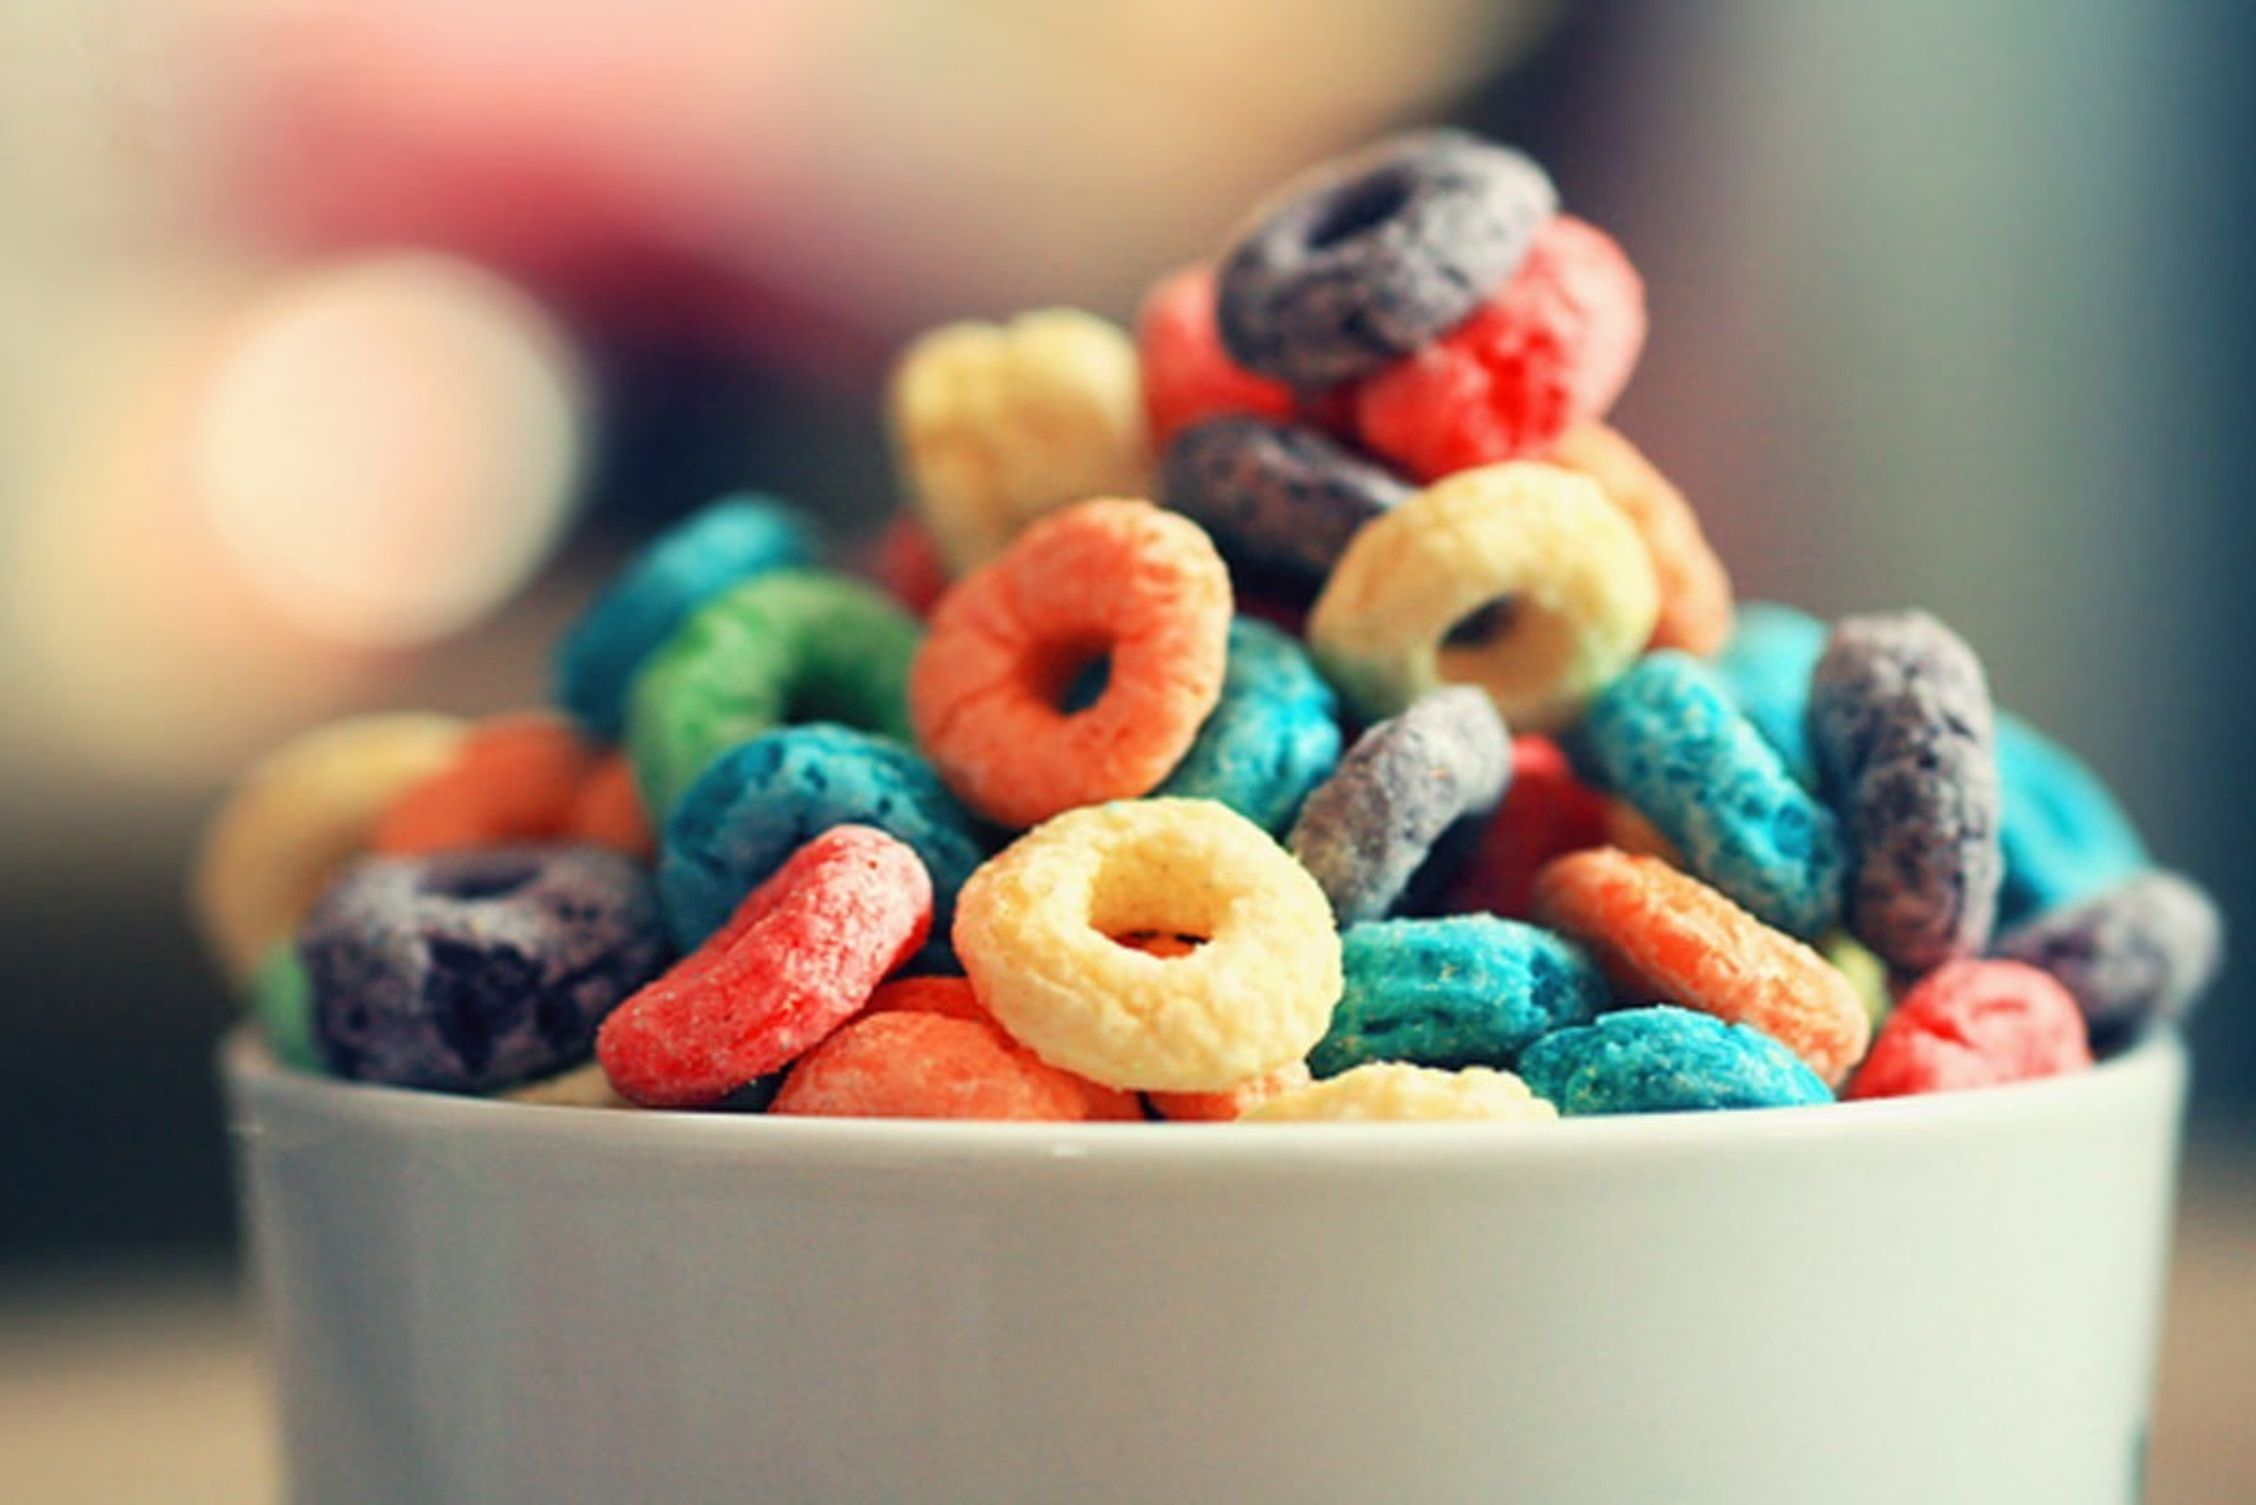 Ready-to-eat breakfast cereals